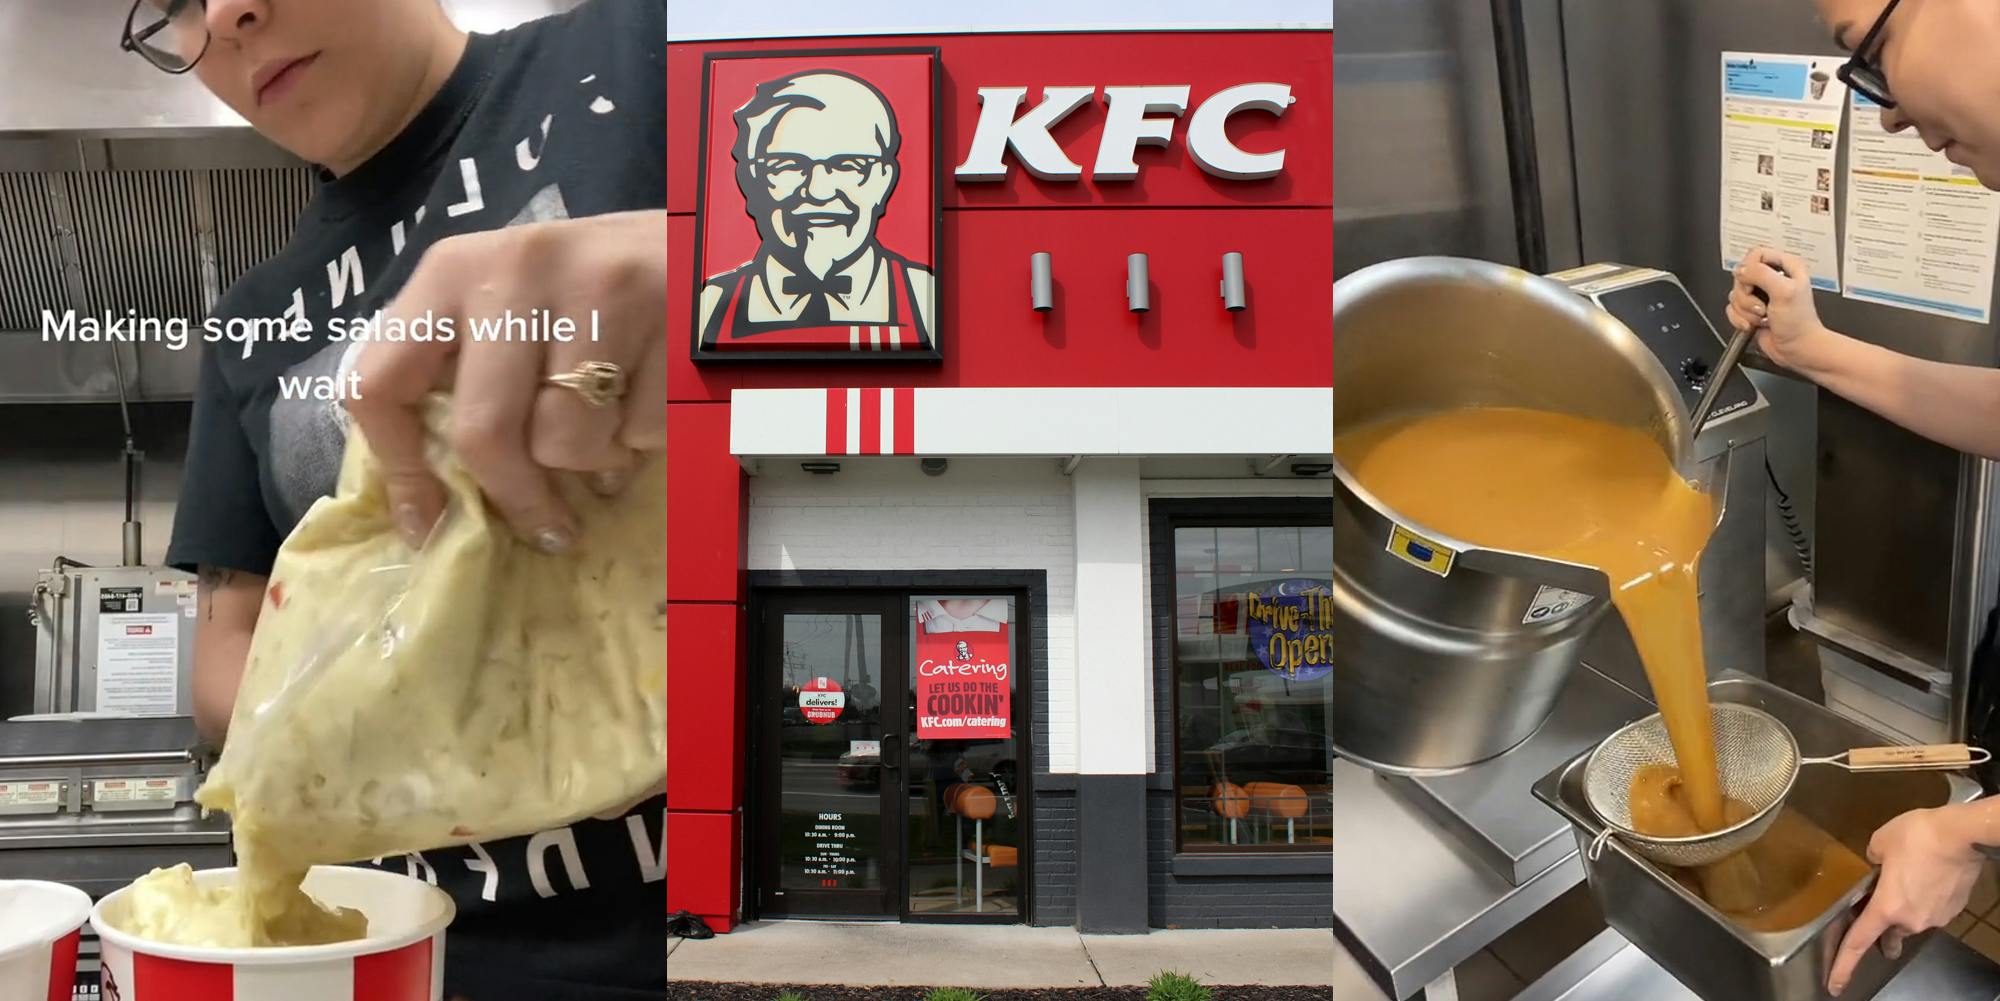 KFC employee prepping salads with caption "Making some salads while I wait" (l) KFC building with sign (c) KFC employee dumping gravy from pot to sifter (r)